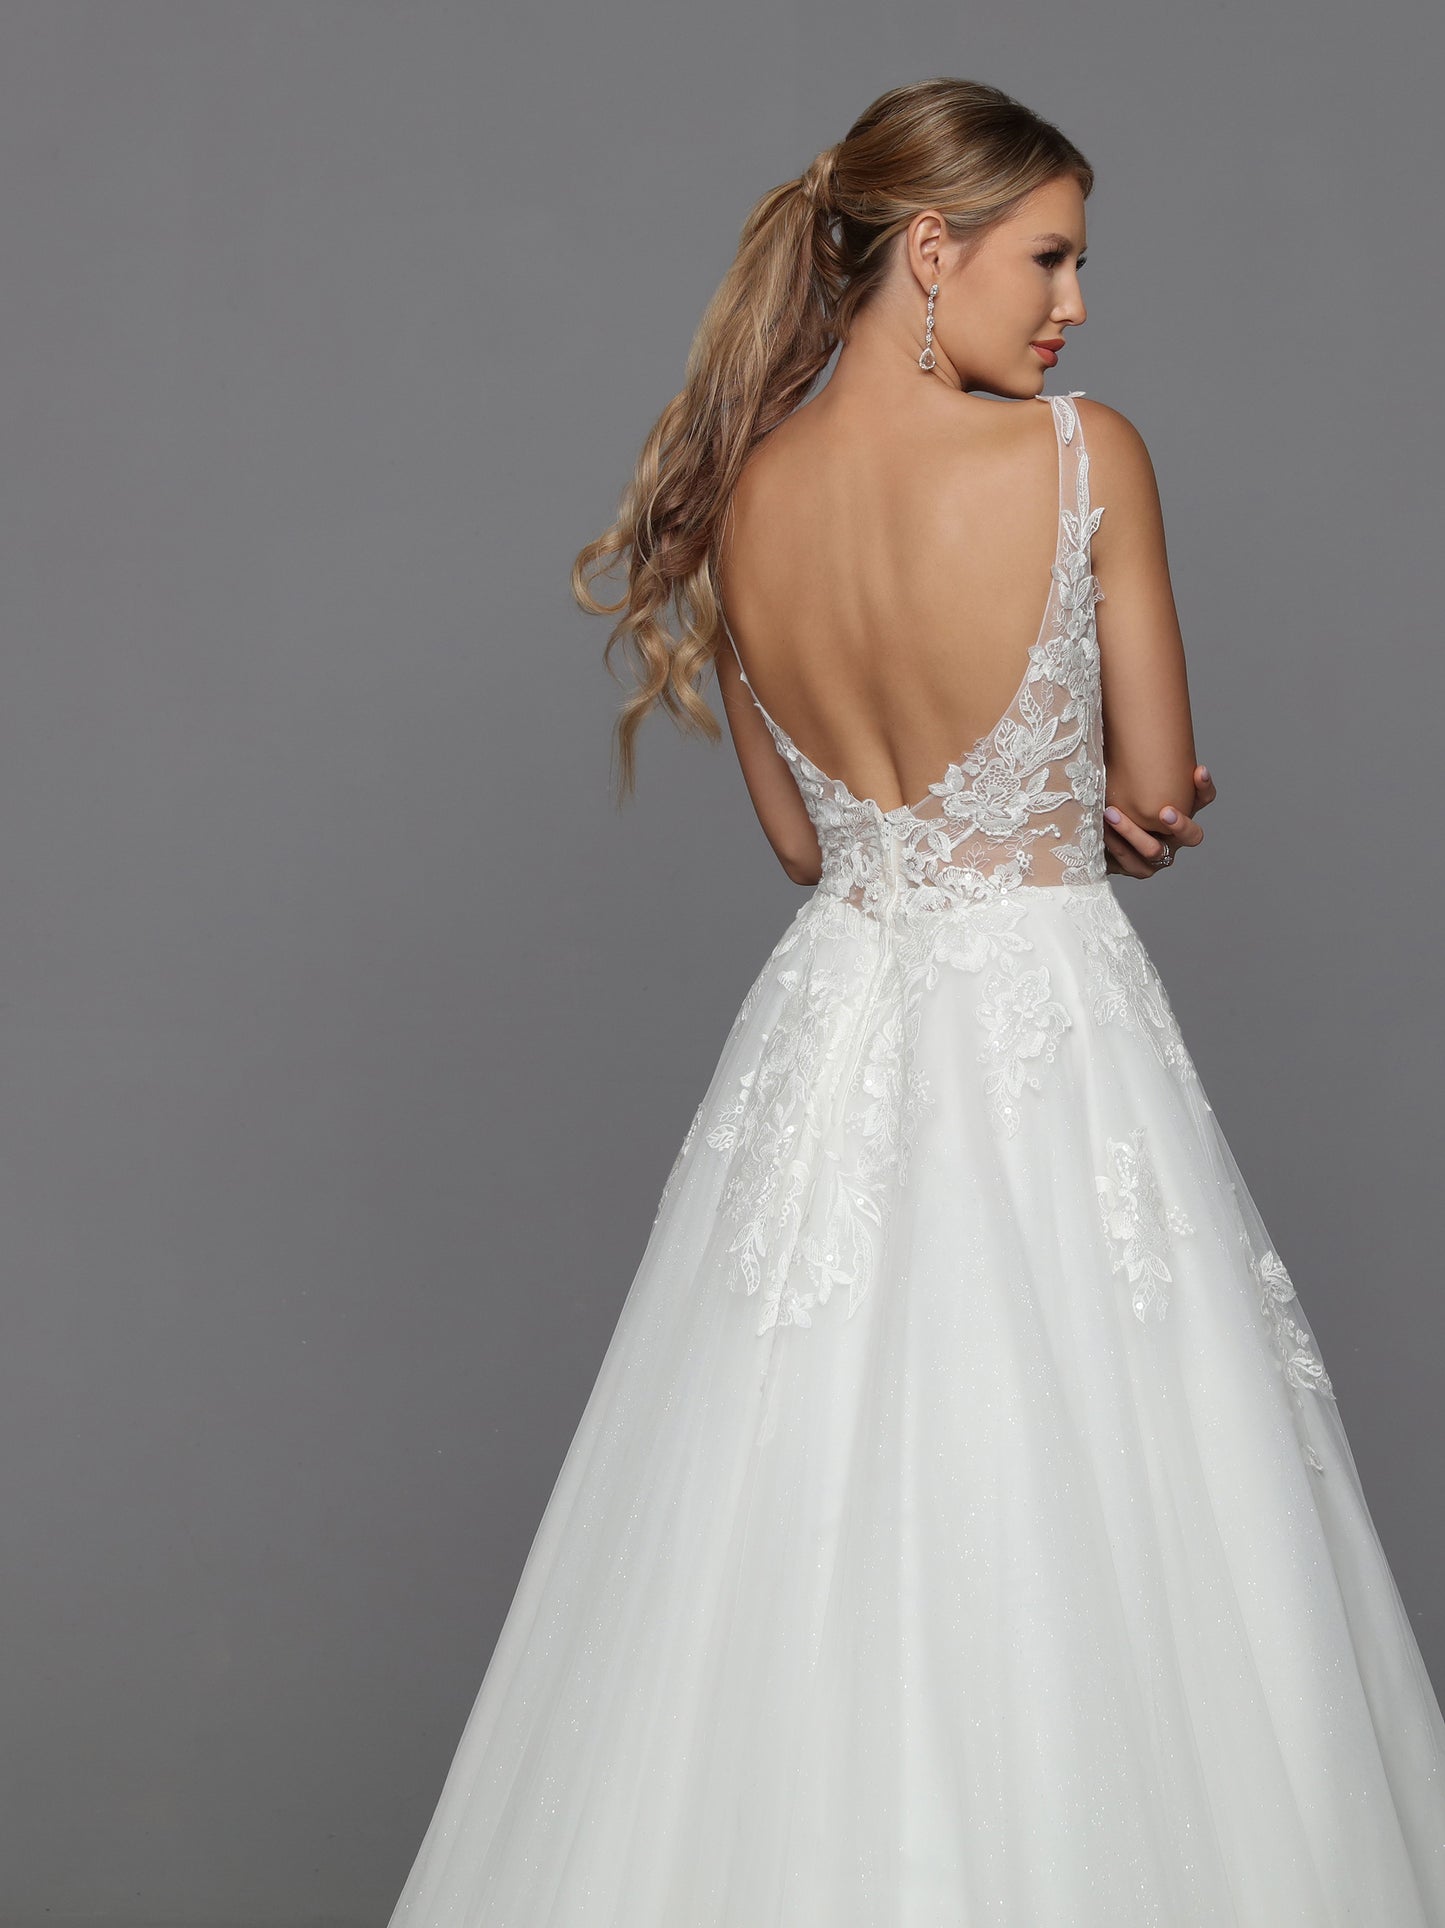 DaVinci Bridal 50769 A-Line Ballgown Illusion High Neck Long Sleeve Floral Lace Train Wedding Gown. Convertible dresses are always on-trend, like this lush ball gown with sheer full-length sleeves highlighted with rich lace applique. The alluring low scoop back is balanced by the modest bateau neckline.